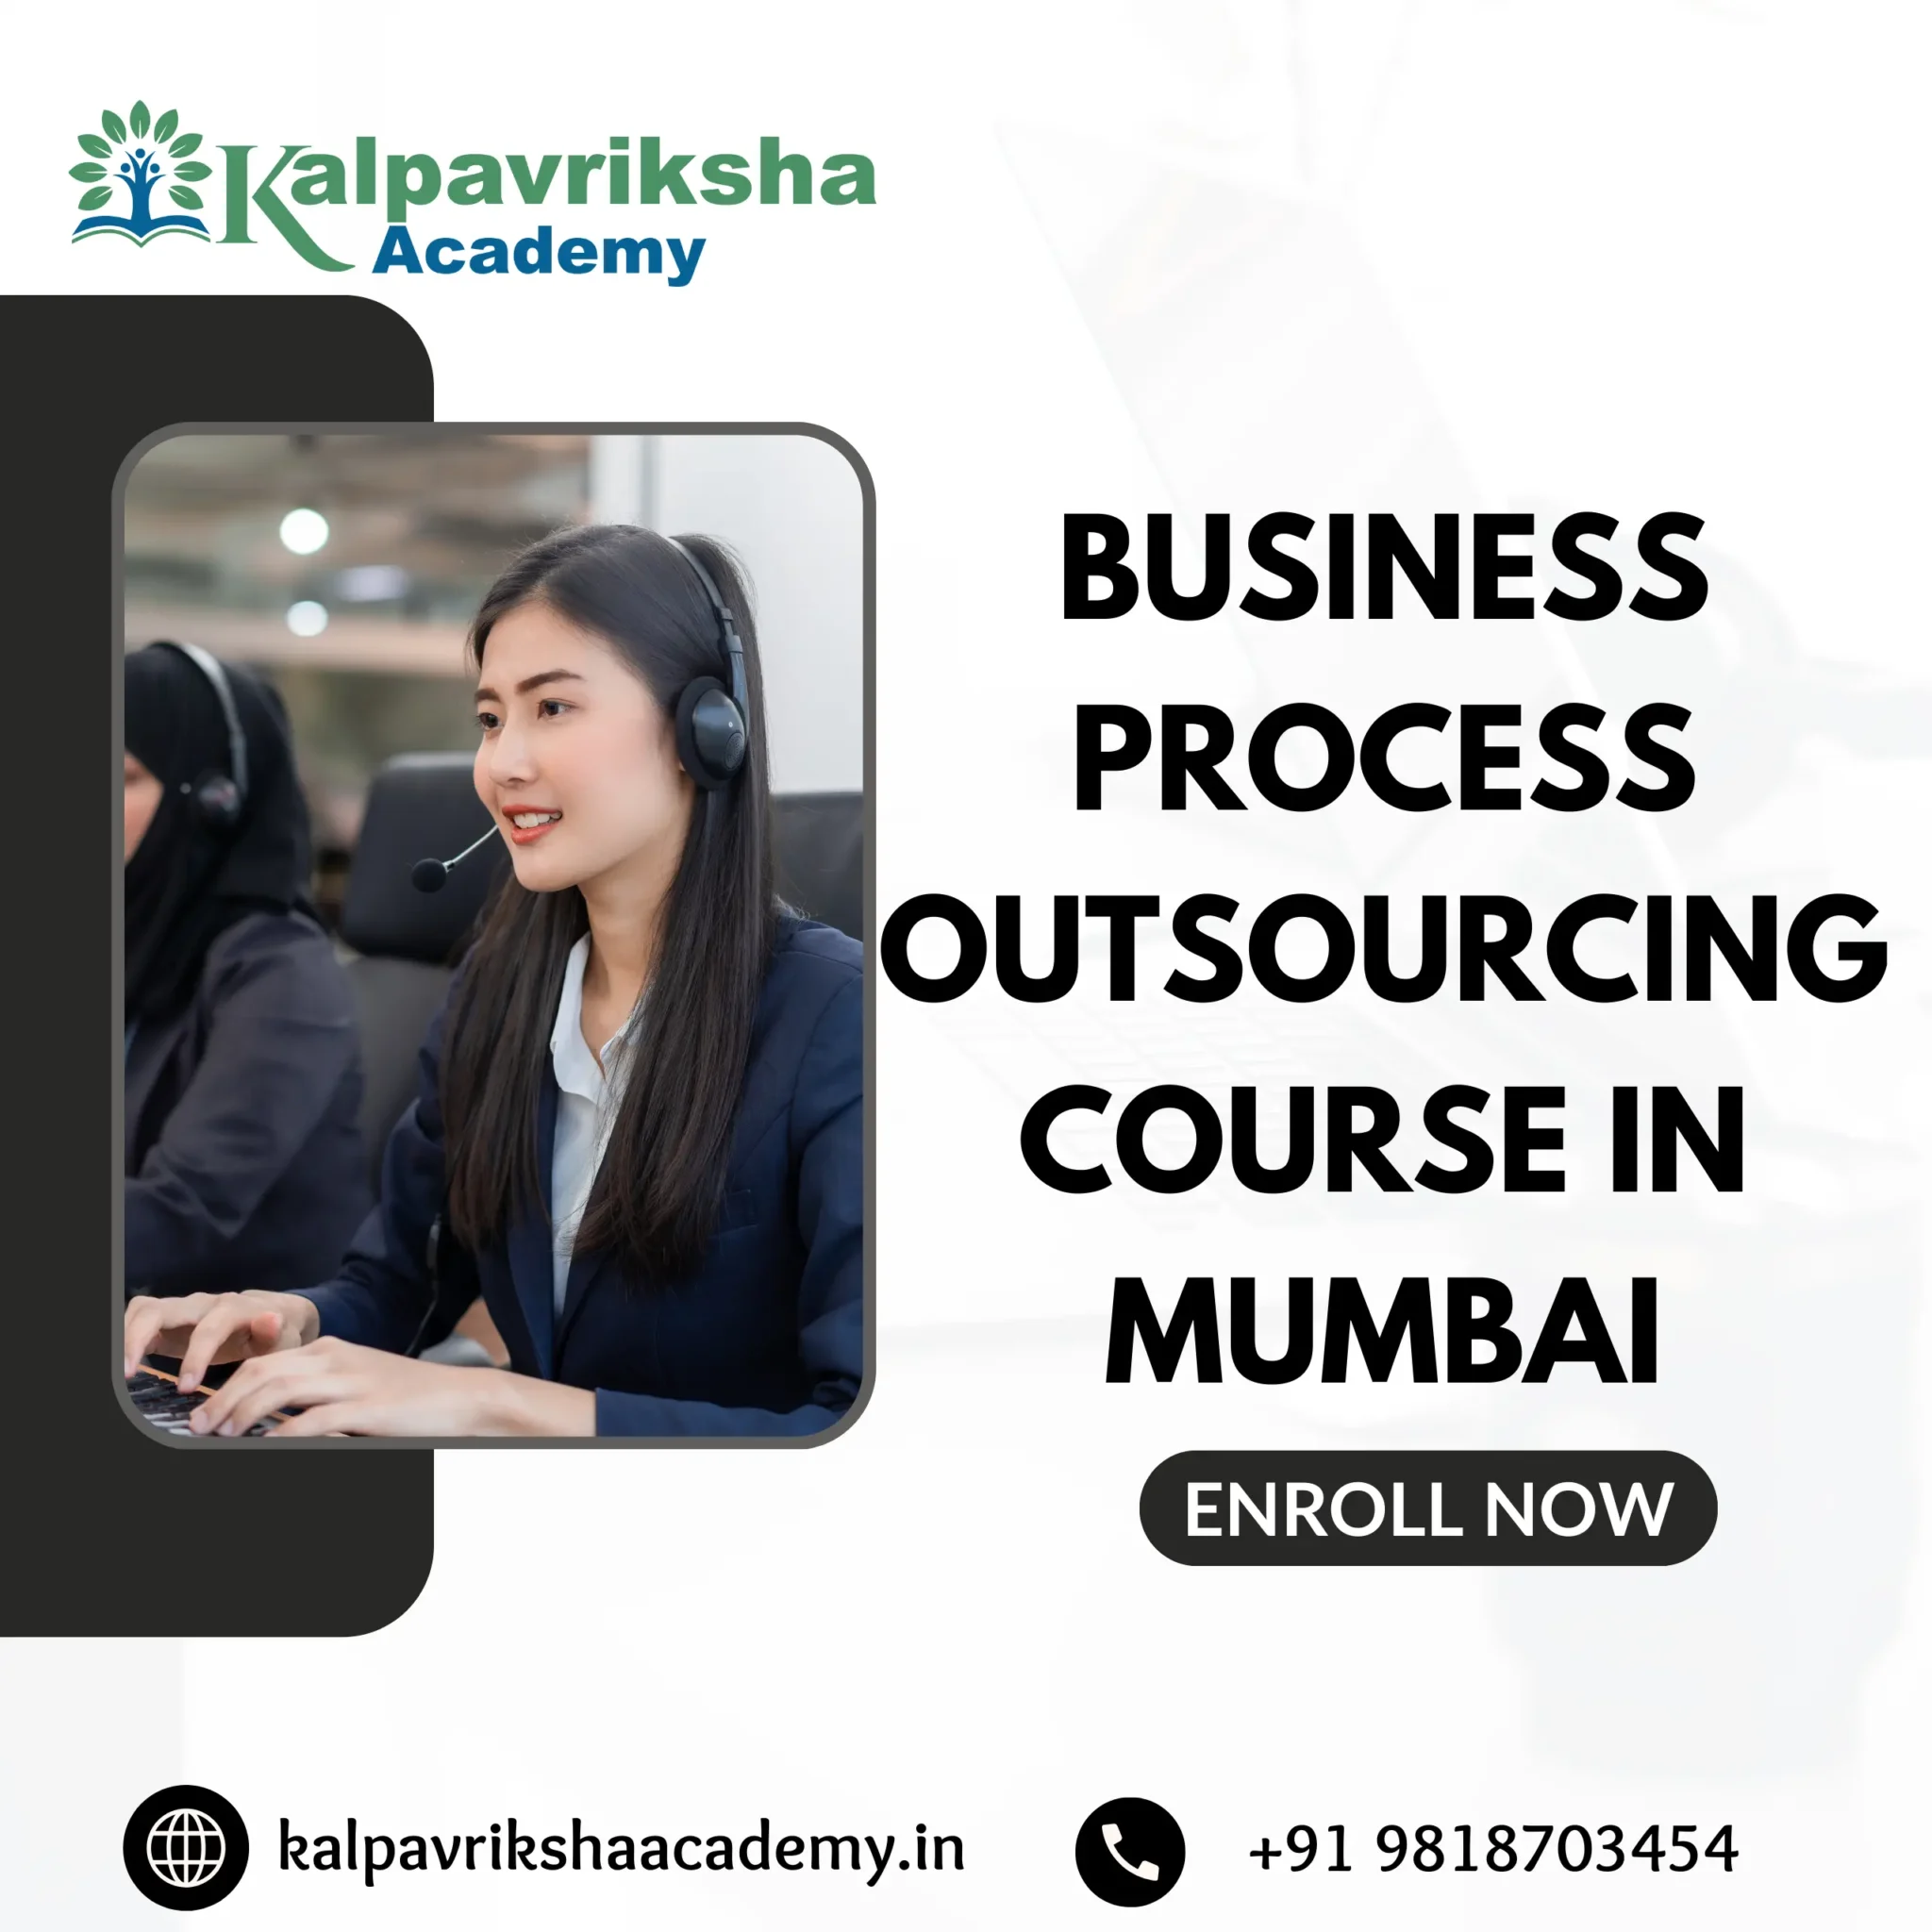 Online Business Process Outsourcing (BPO) Course In Mumbai